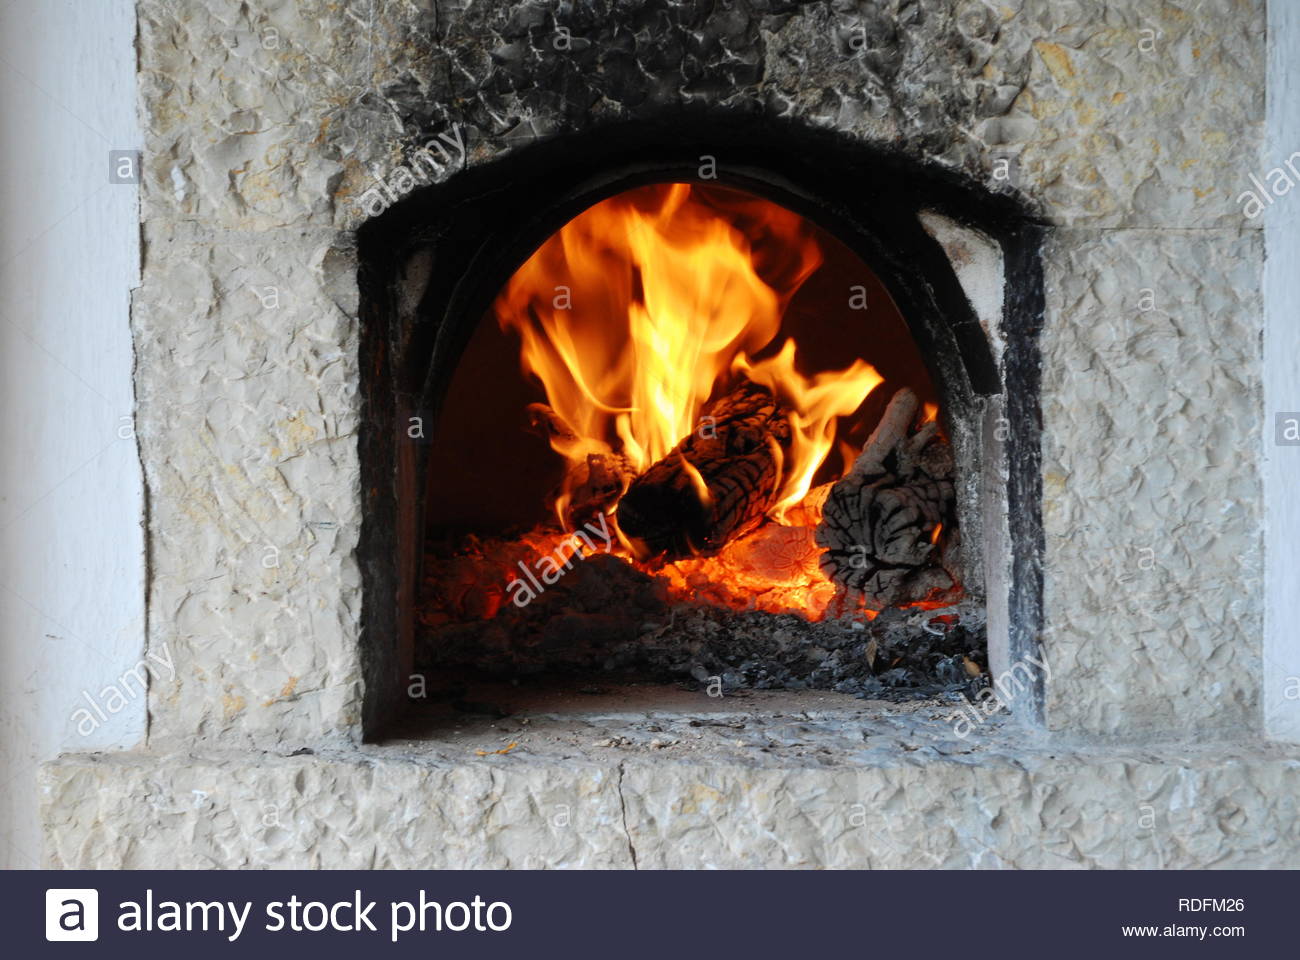 traditional firewood oven burning flames in fireplace RDFM26